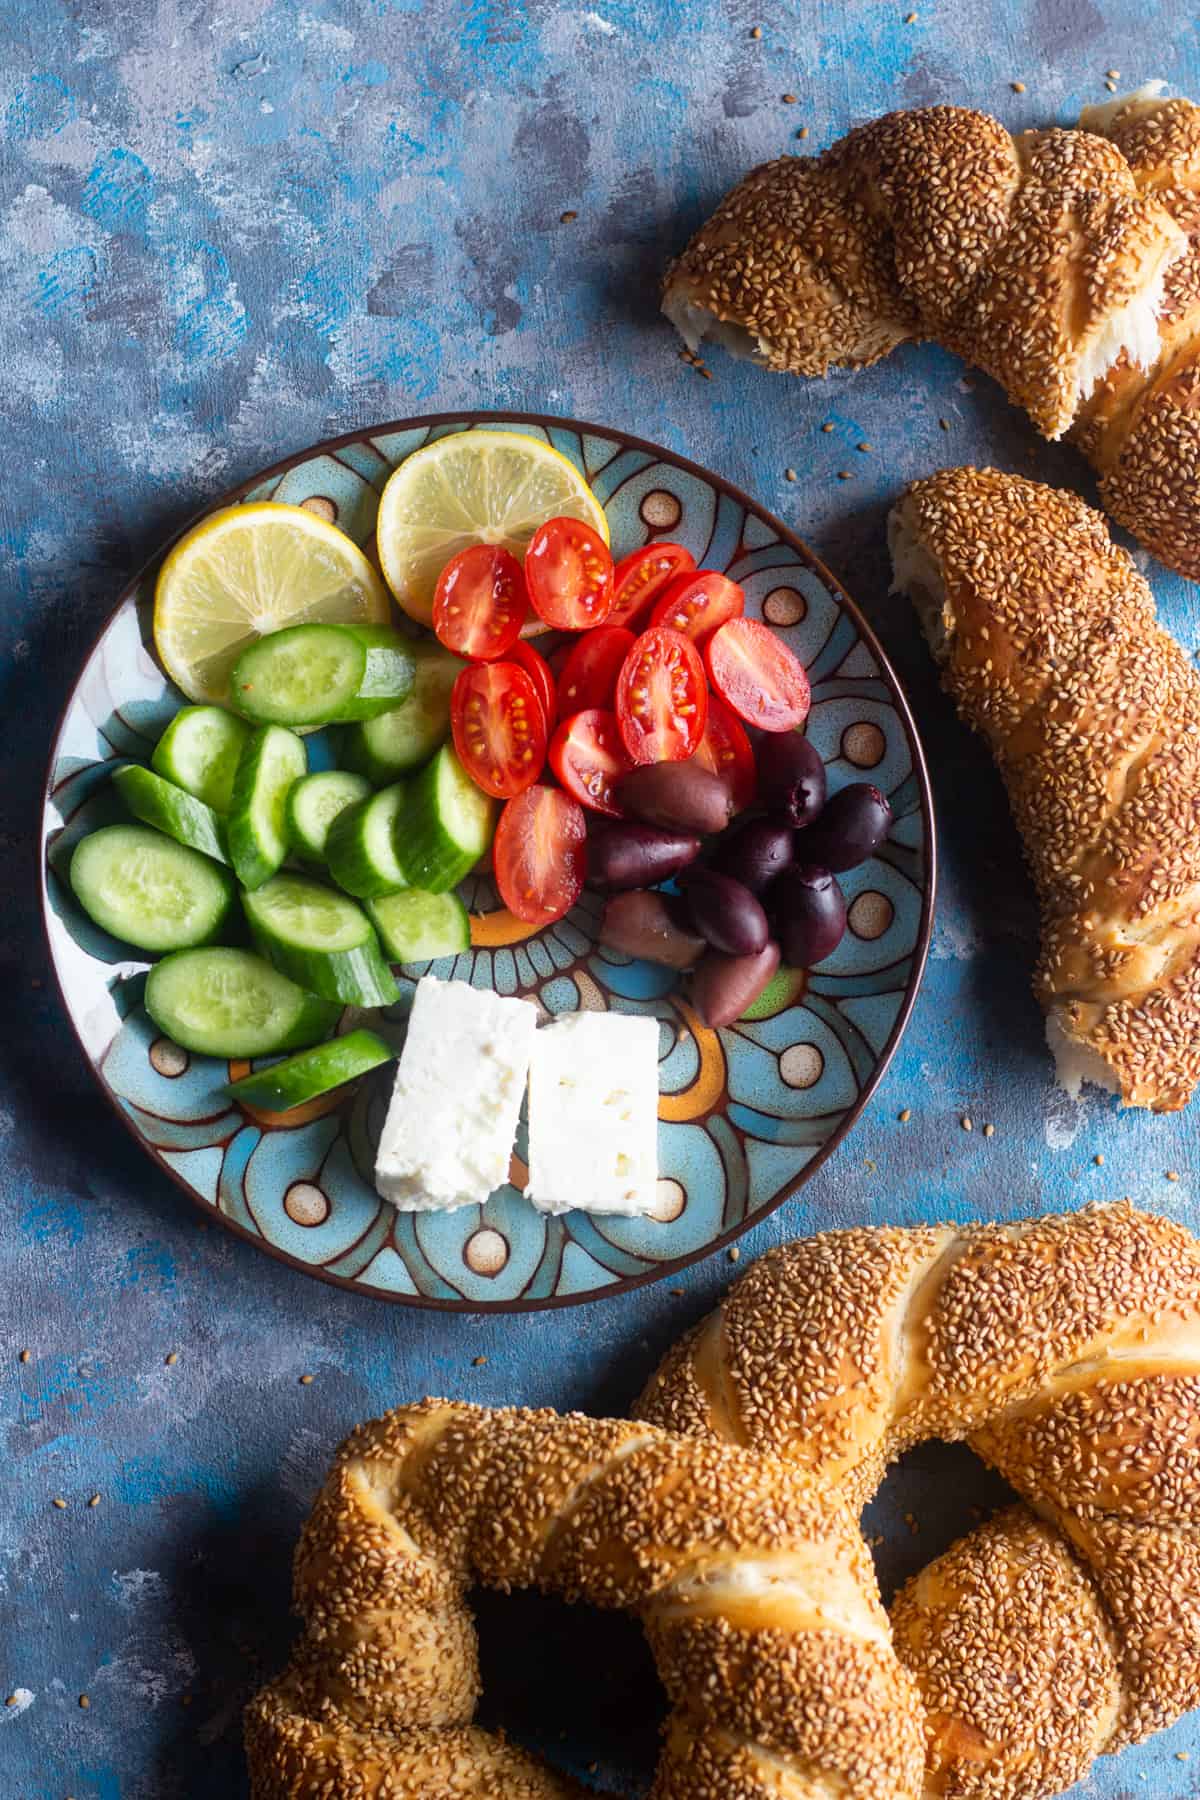 We also love having it with jam or chocolate spreads, needless to say that tahini and molasses is another favorite spread that compliments this Turkish bread very nicely. 